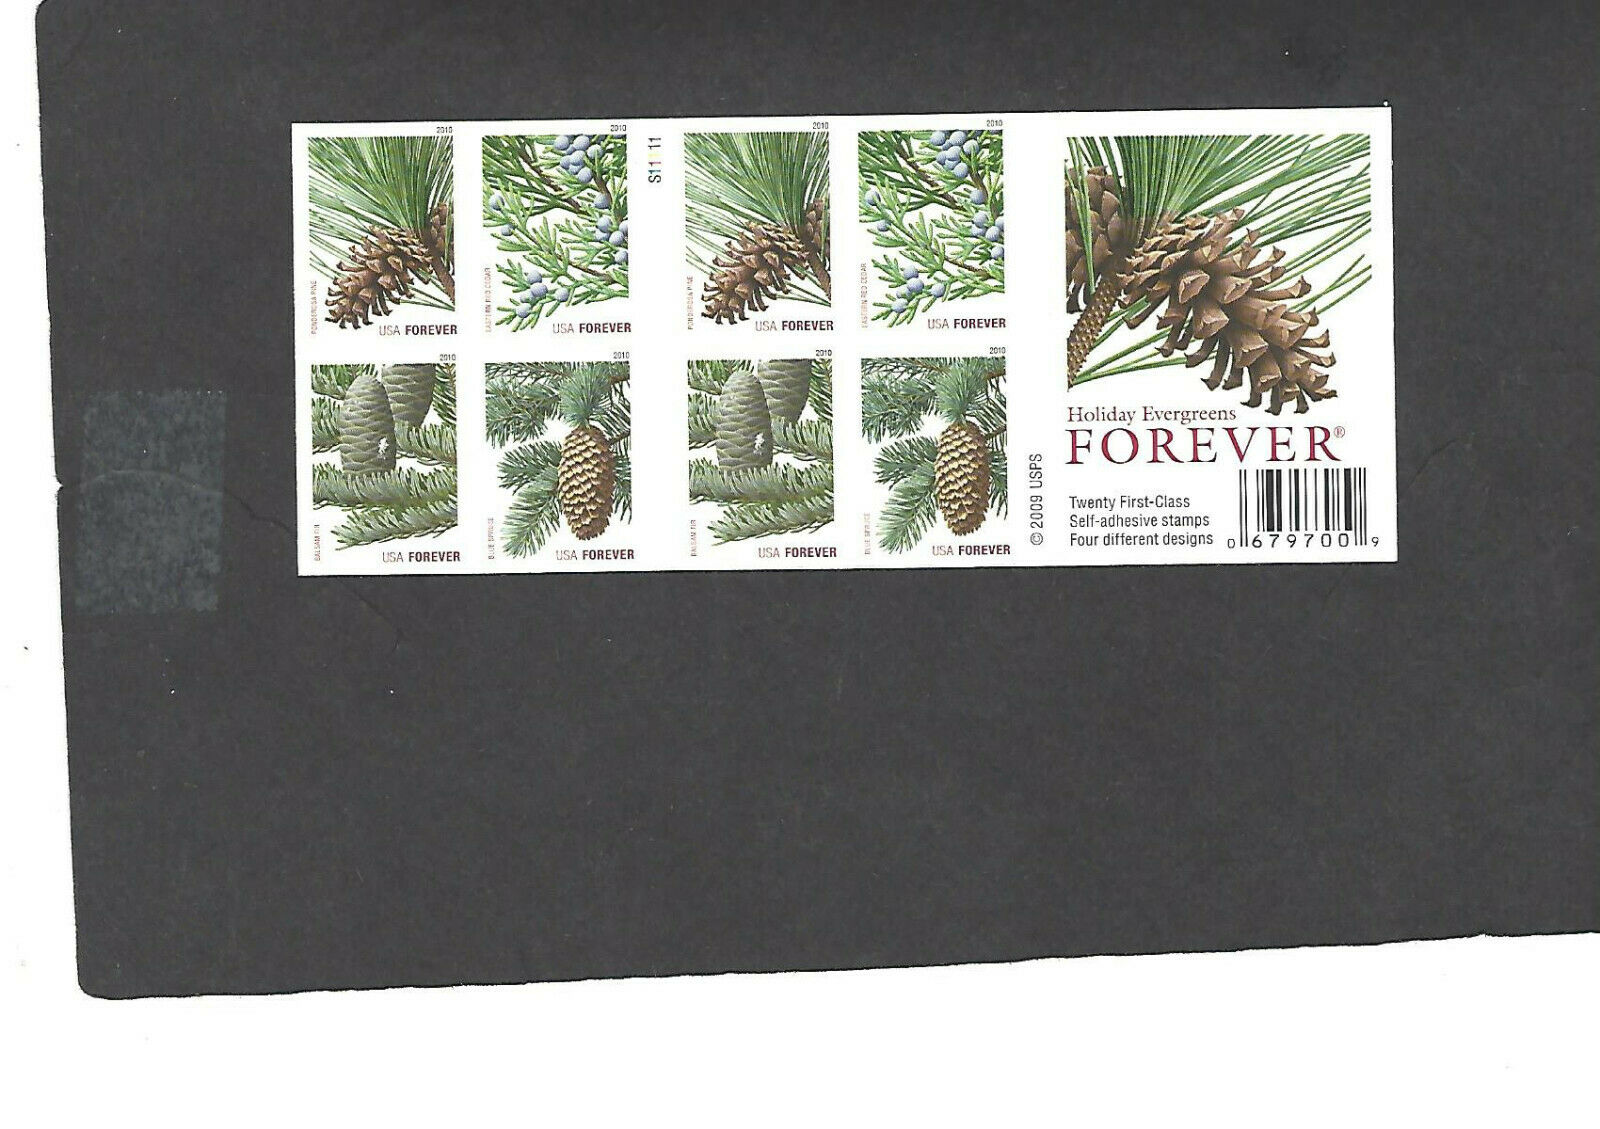 #4478-81 Holiday Evergreens Booklet Pane Of 20 Forever Stamps Mnh Unfolded